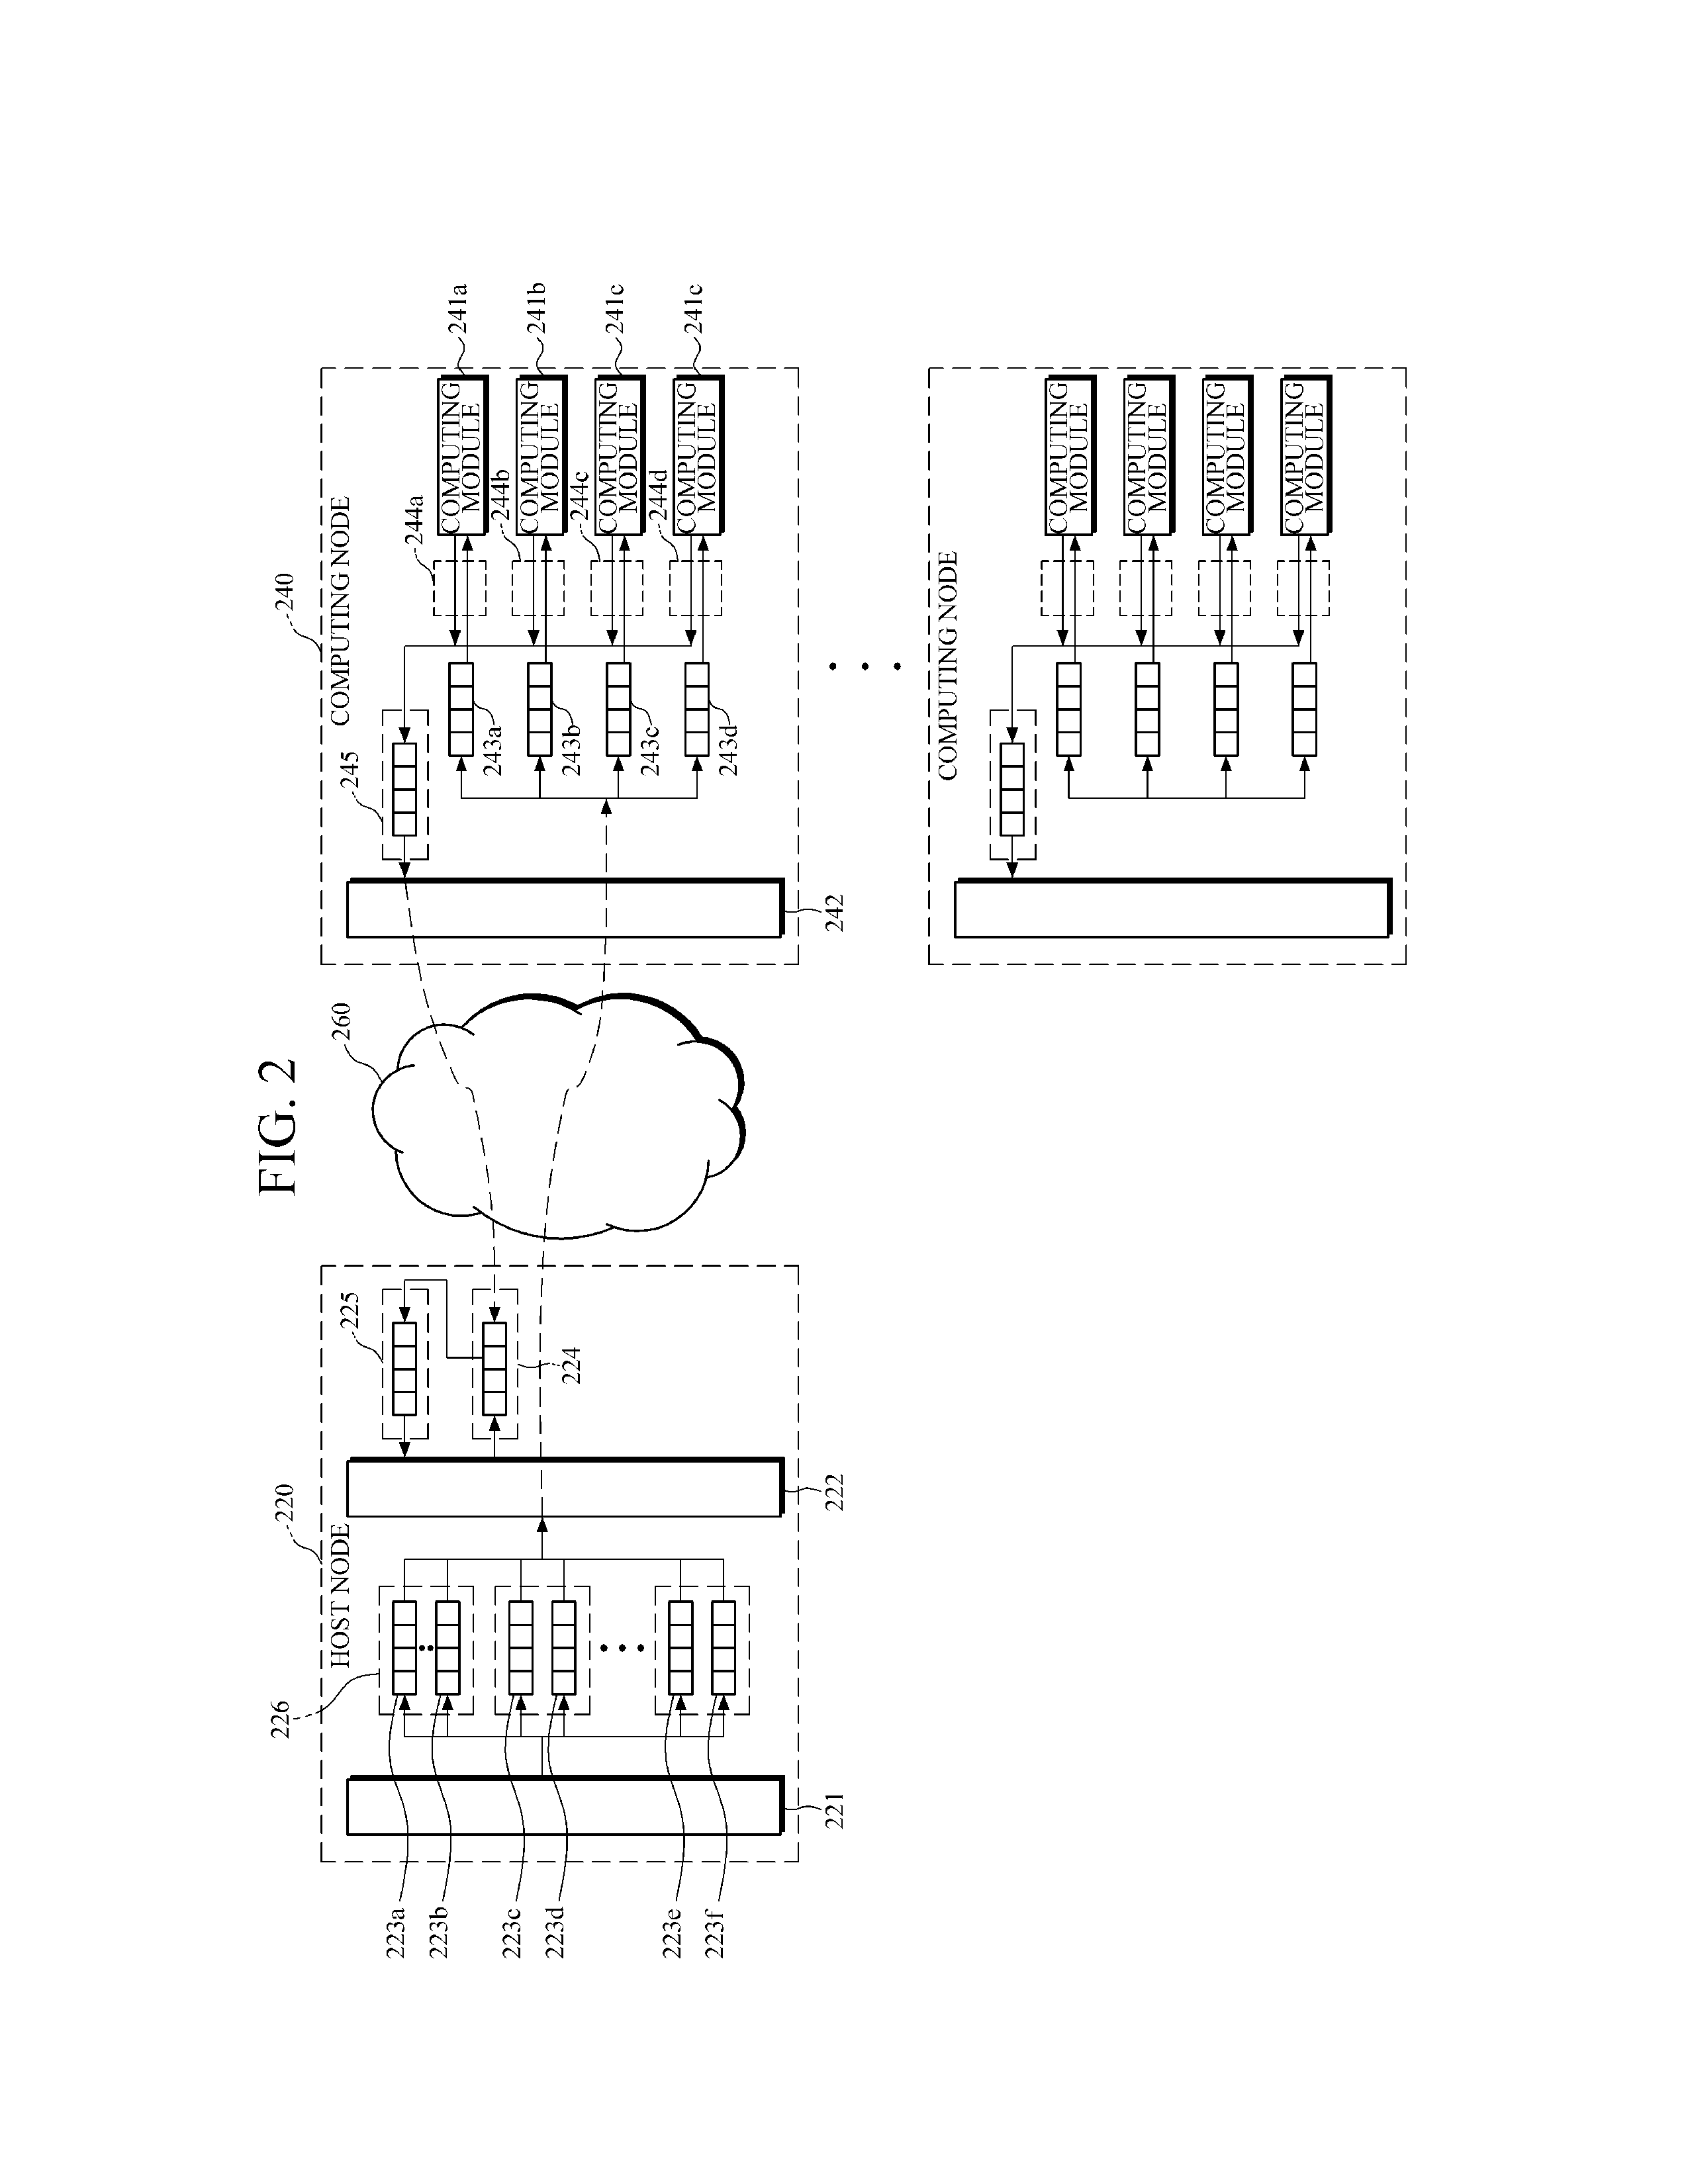 Cluster system based on parallel computing framework, and hose node, computing node and method for executing application therein